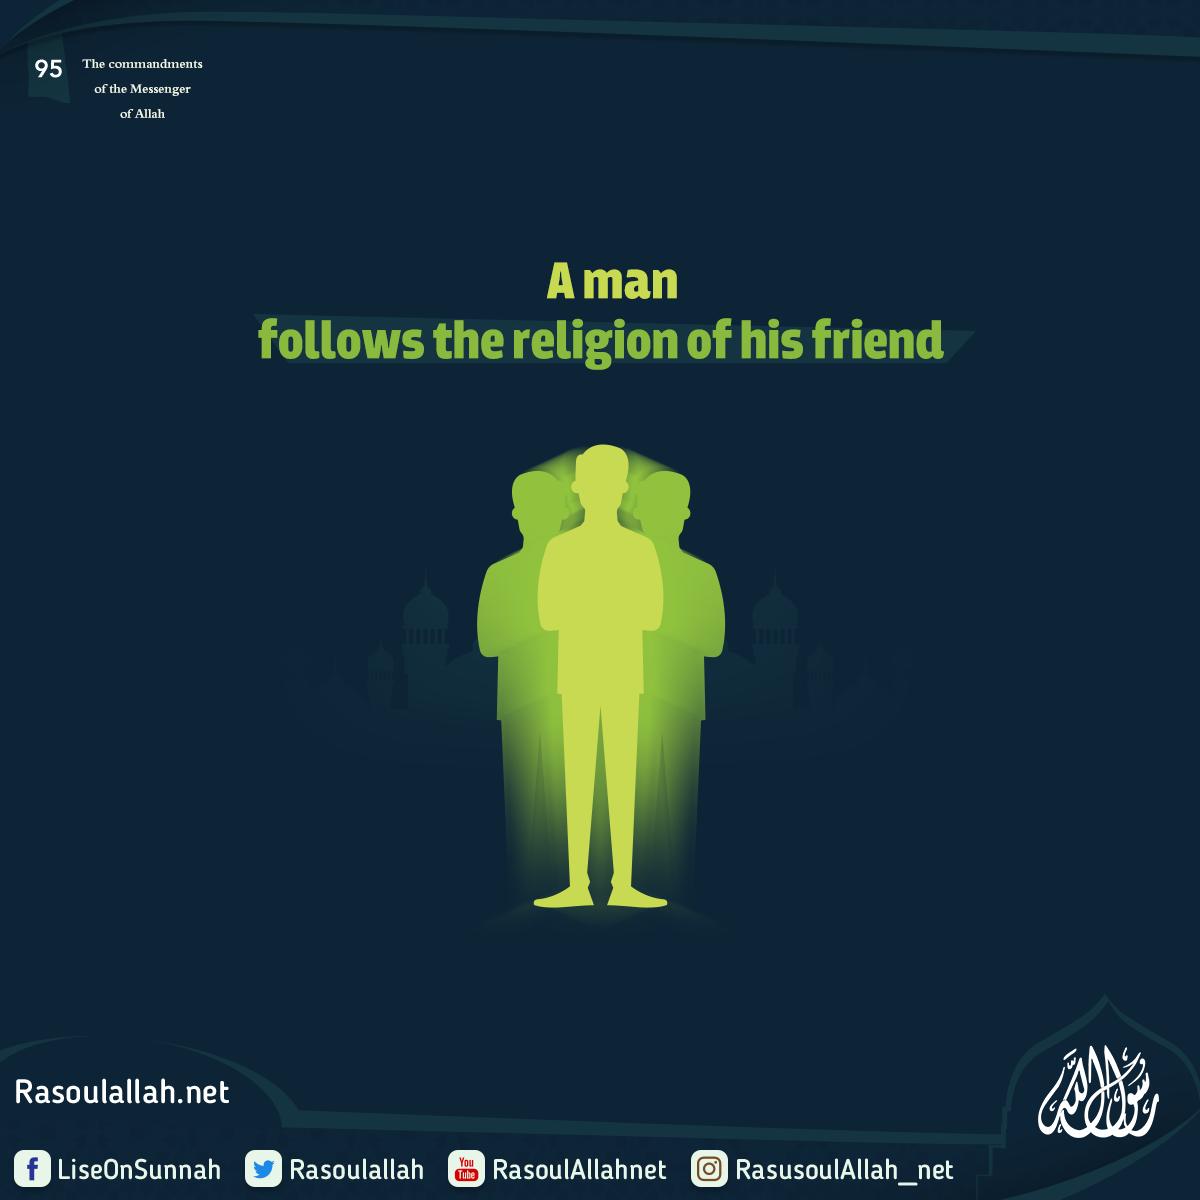 A man follows the religion of his friend